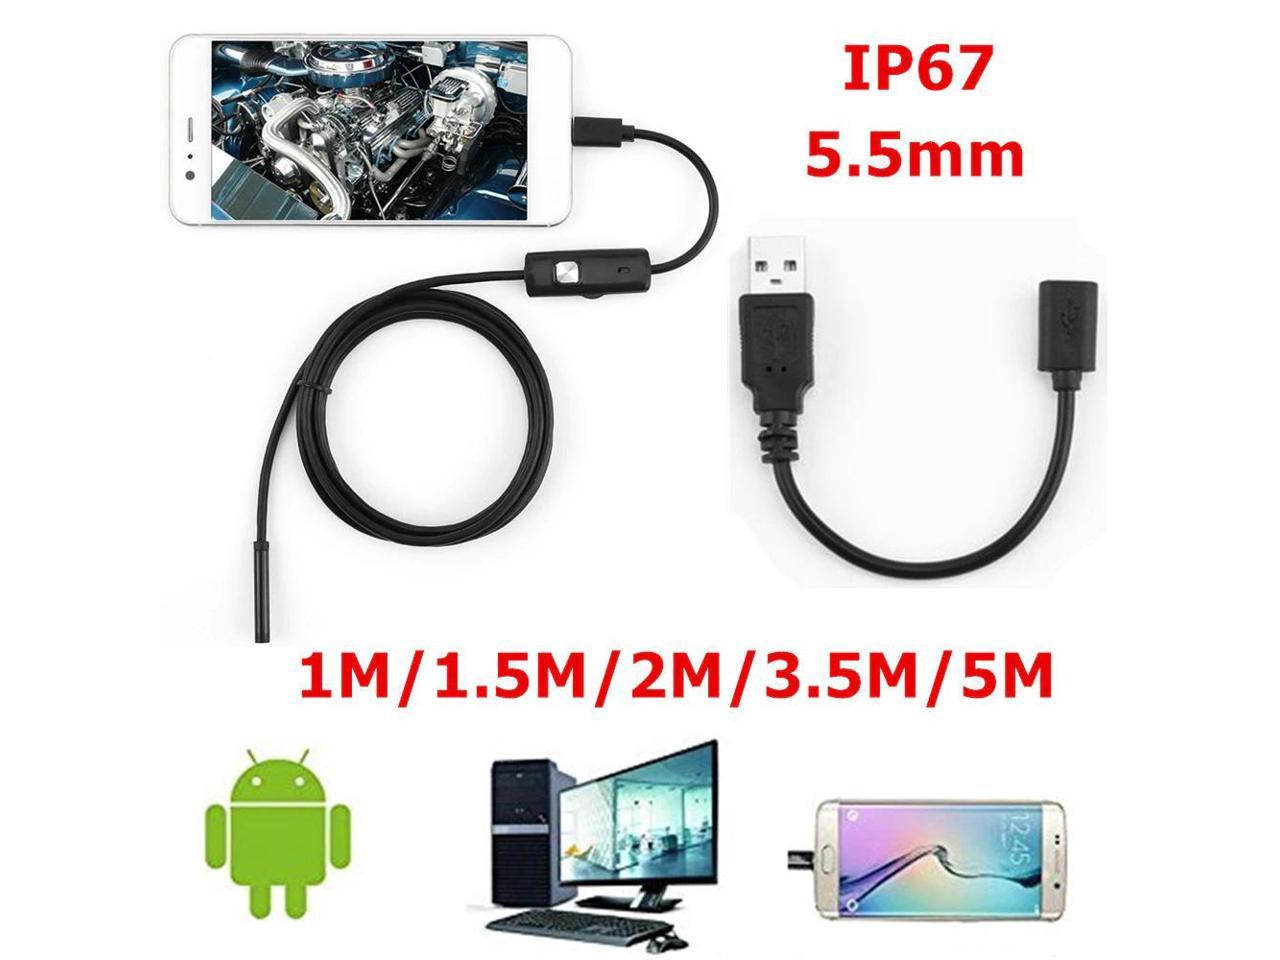 5m 6LED Android Endoscope Waterproof Inspection Camera USB Video Came WK 